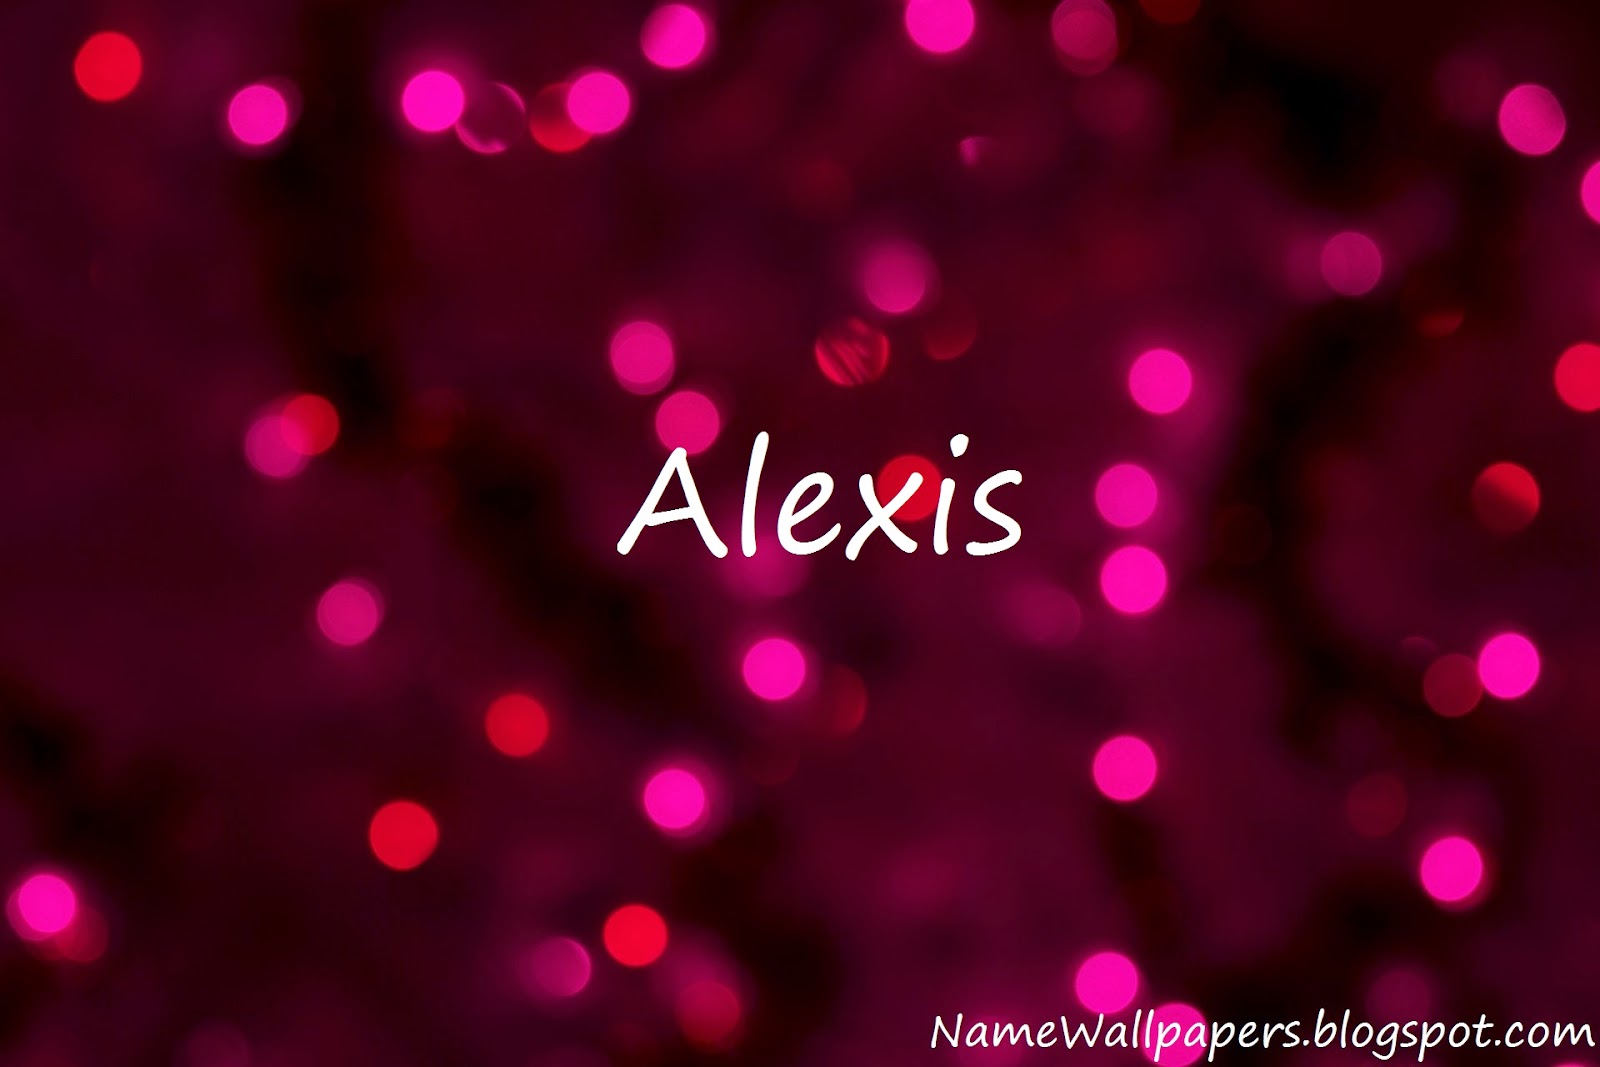 Find more Alexis Name Wallpapers Alexis Name Wallpaper Urdu Name Meaning Na...